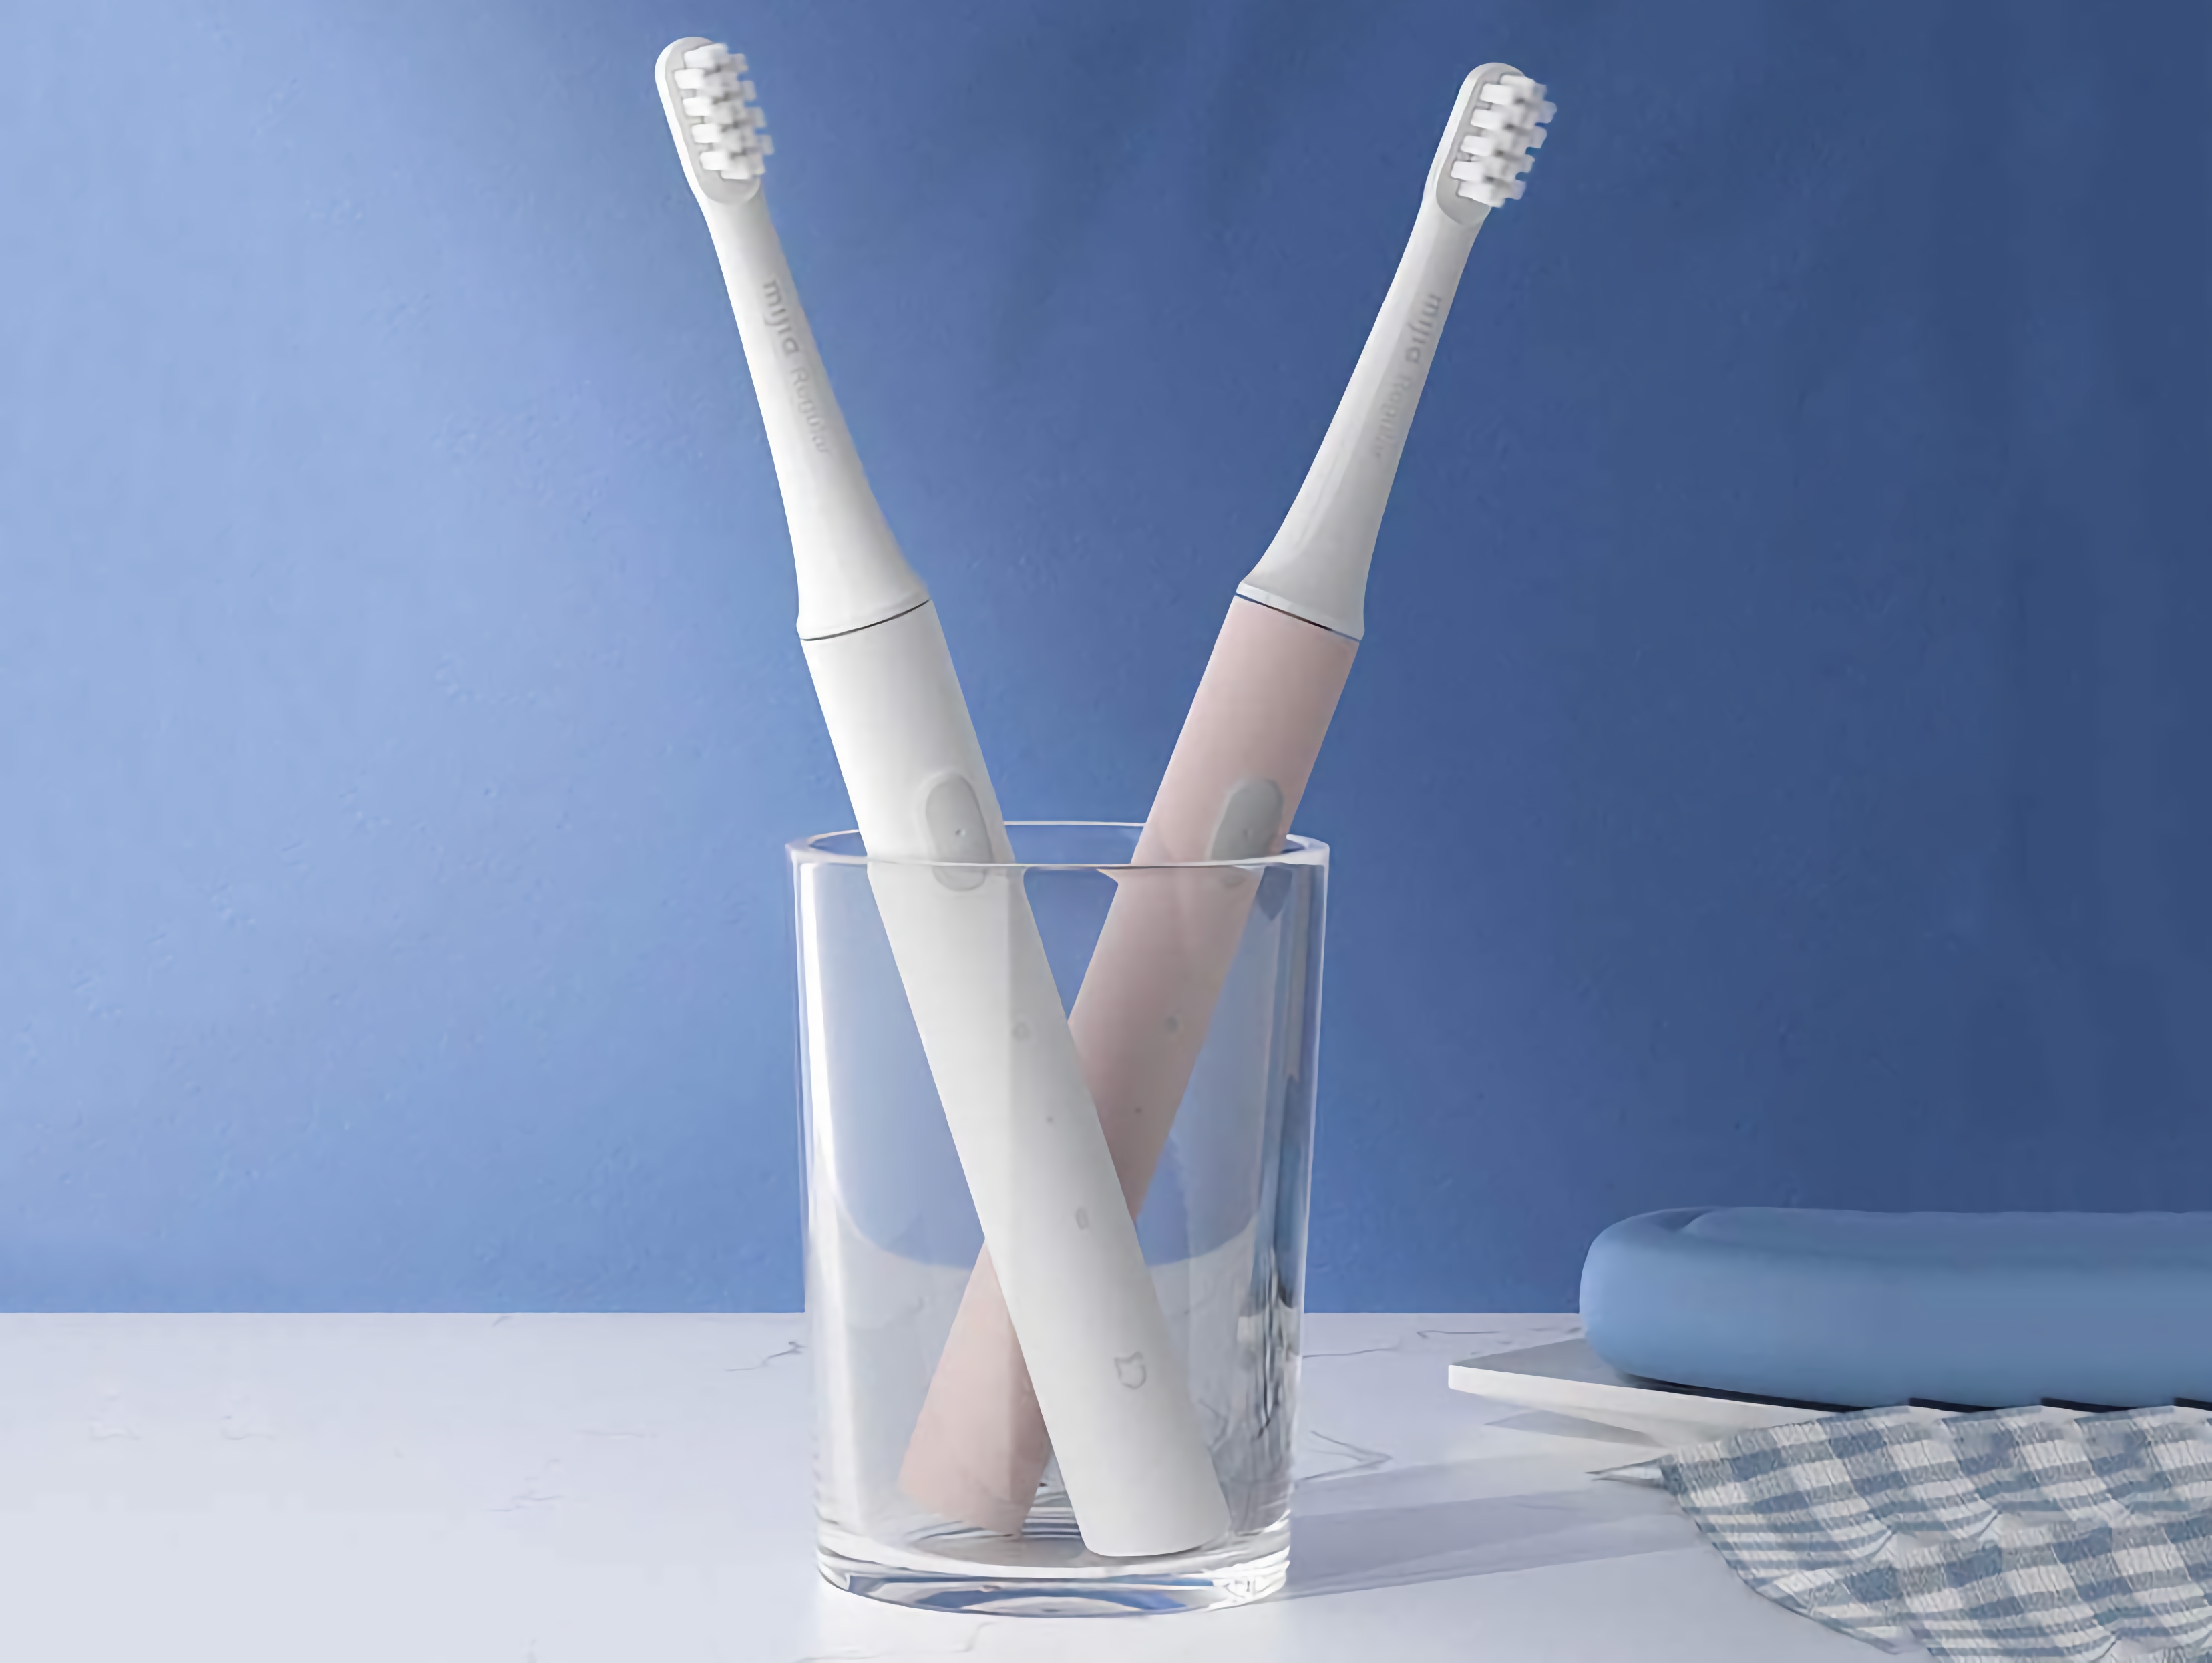 MiJia Sonic T100: a smart toothbrush from Xiaomi ecosystem with IPX7 protection and up to 30 days of battery life for $9